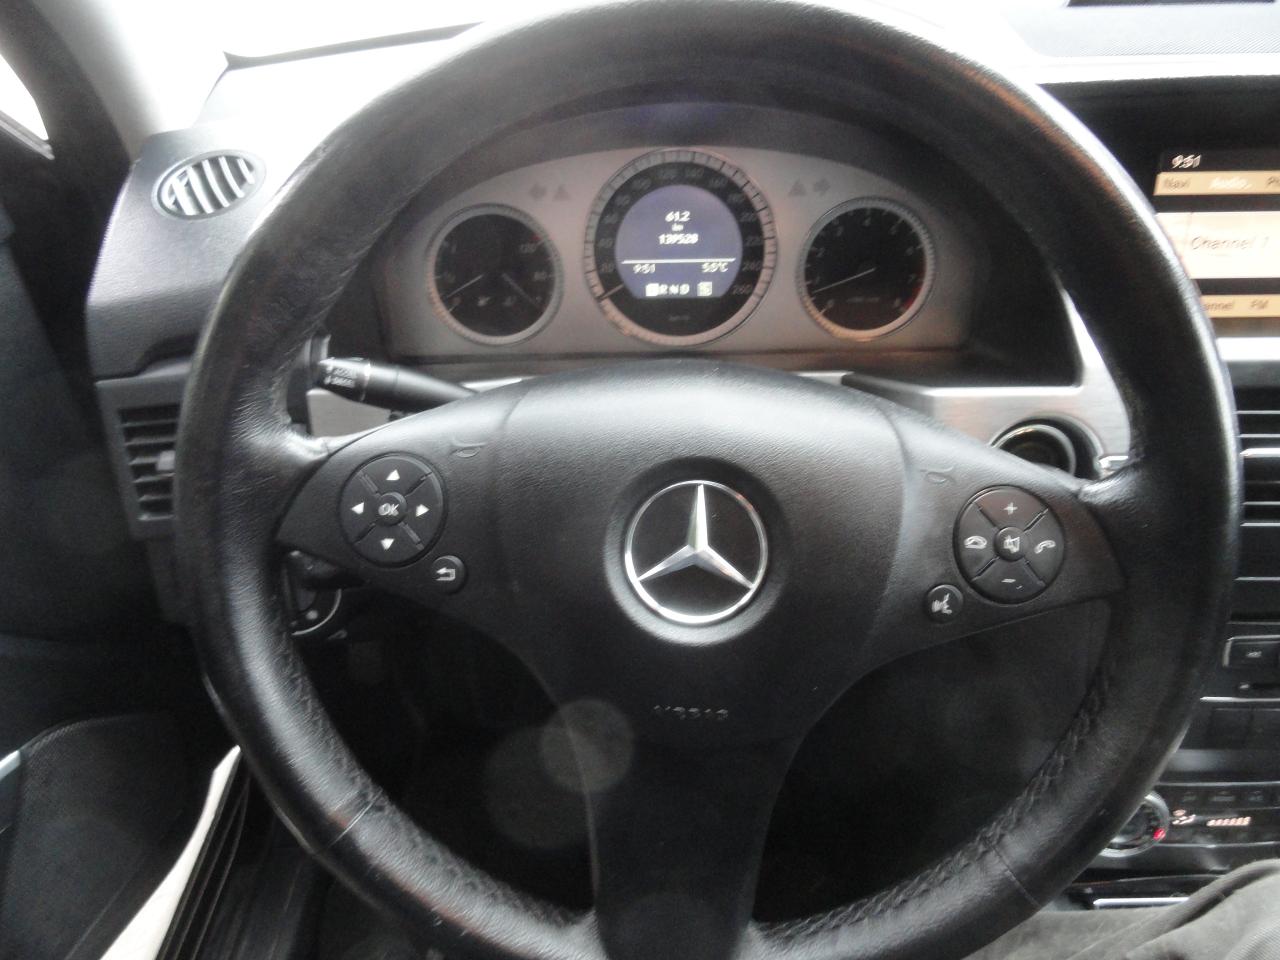 2010 Mercedes-Benz GLK350 4 MATIC -  DOC FEE ONLY $195.00 - Photo #18